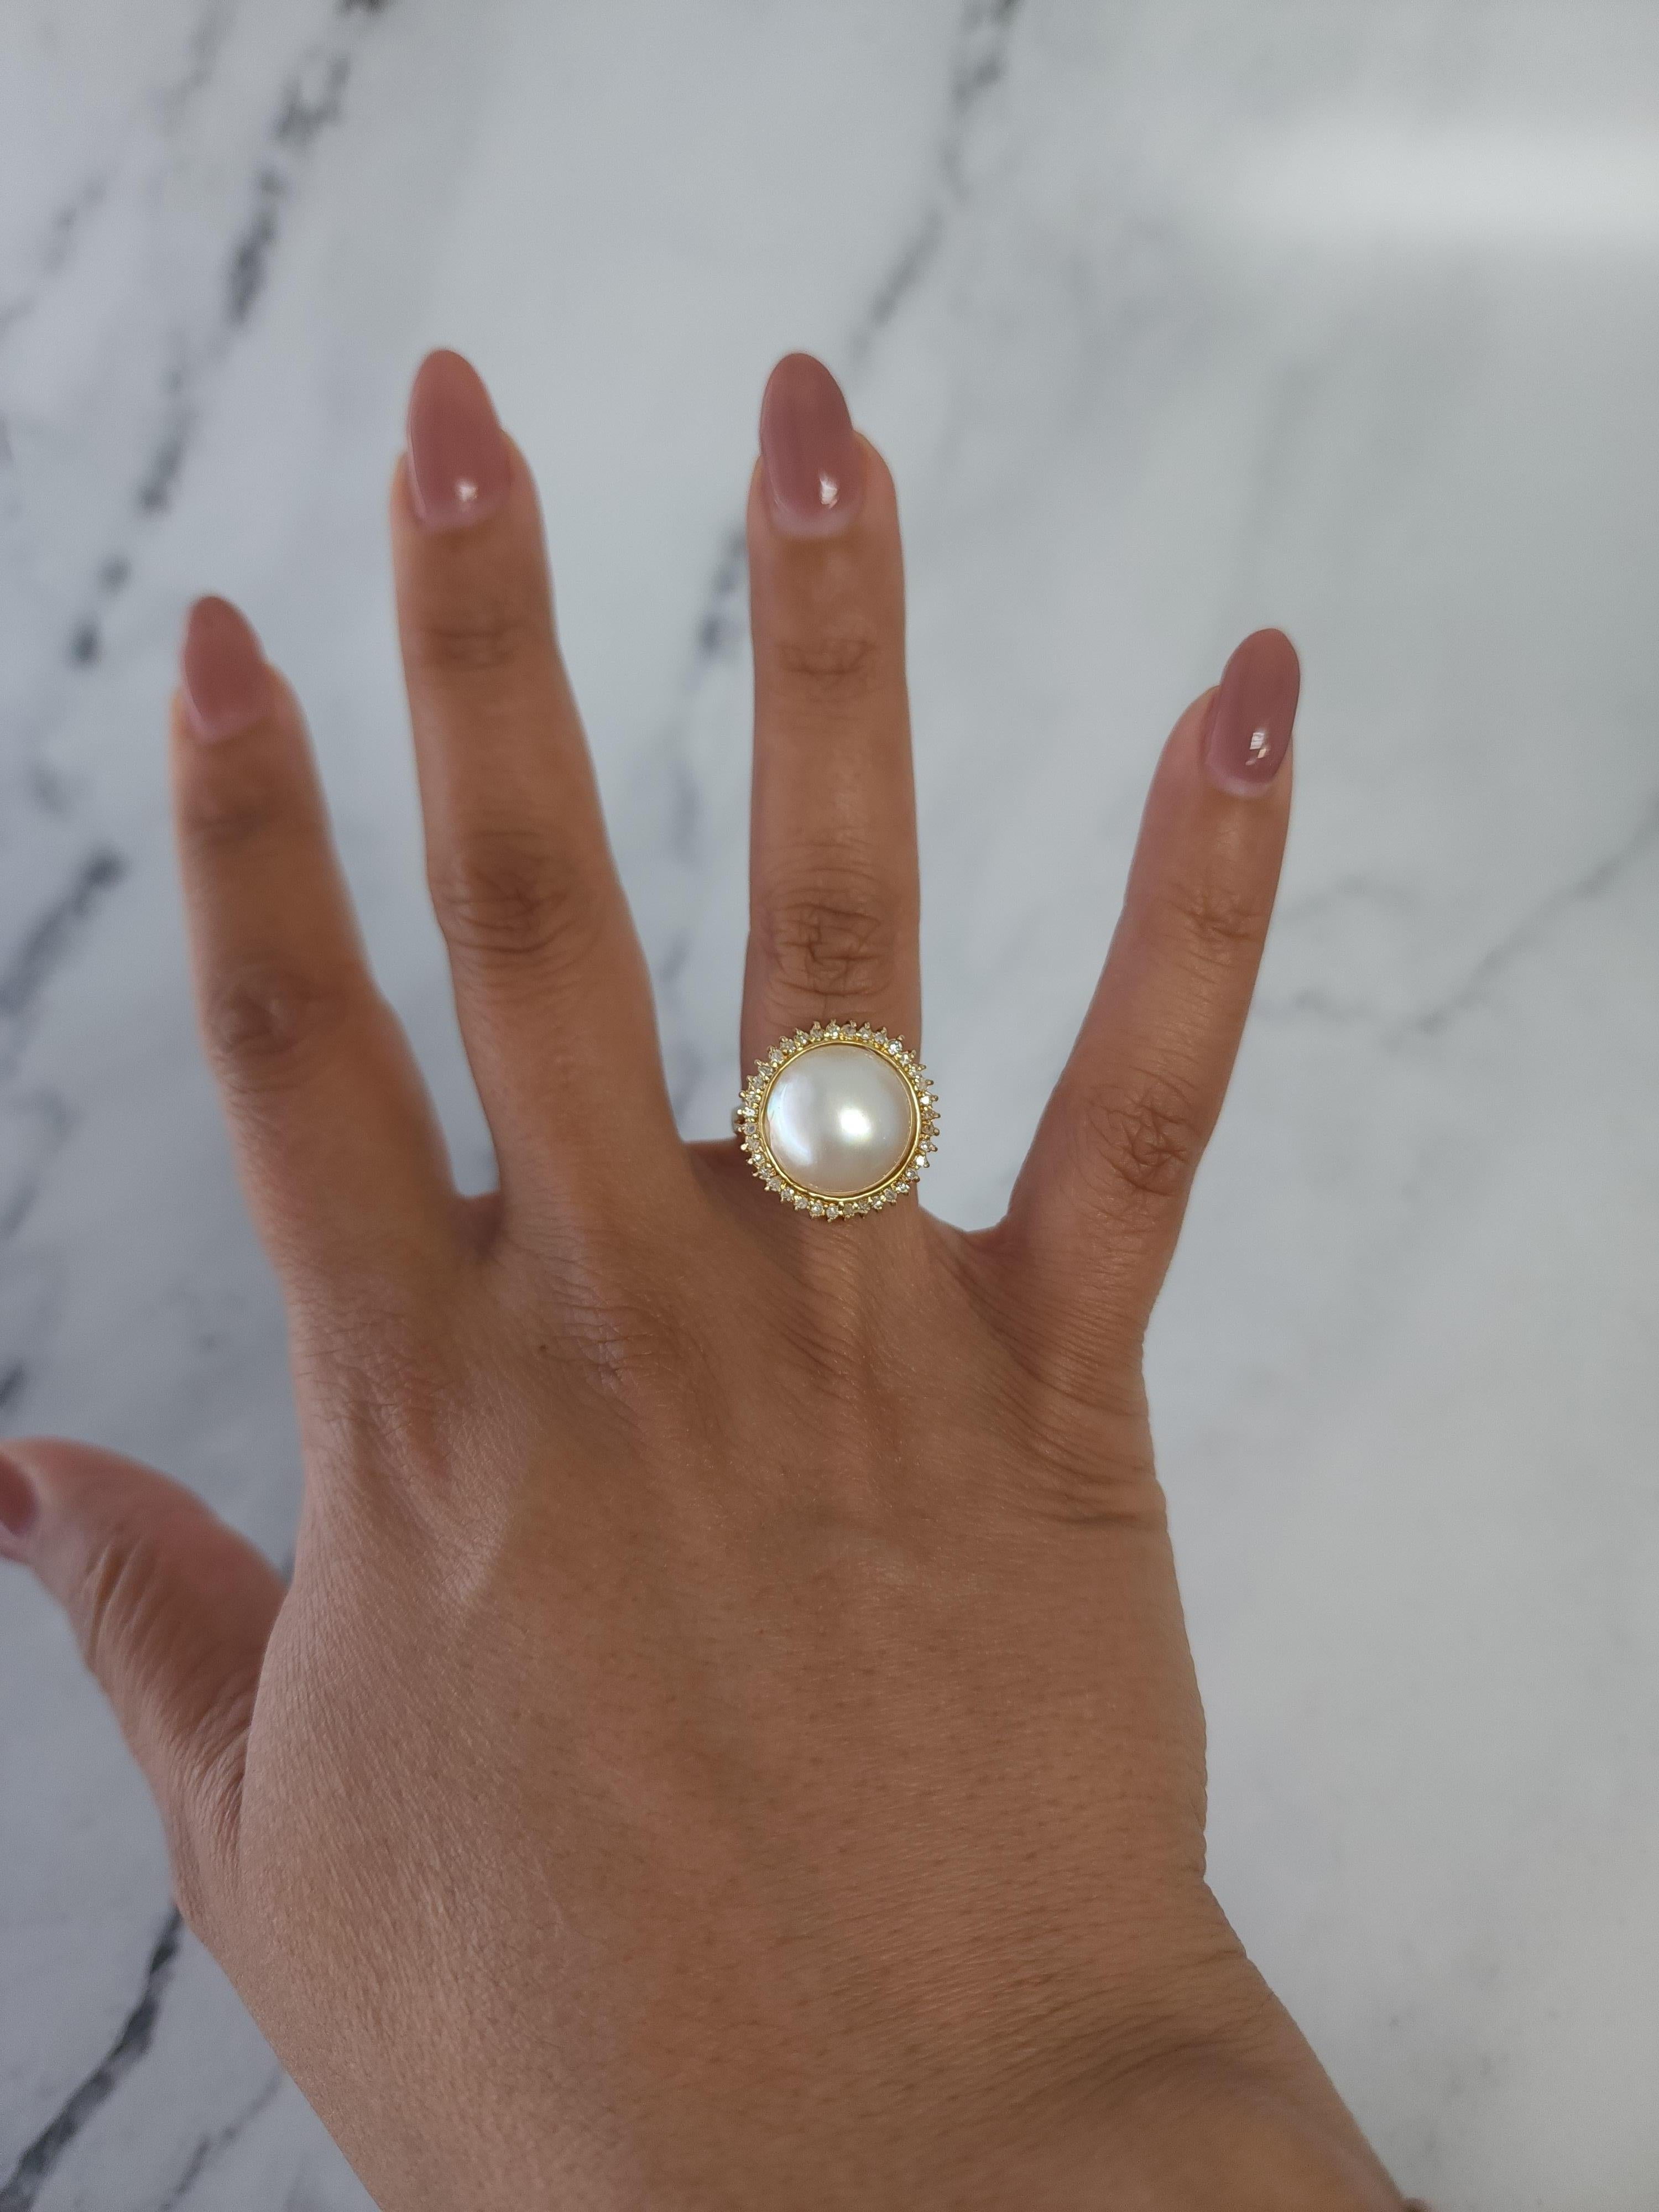 ♥ Product Summary ♥

Main Stone: Pearl & Diamond
Approx. Diamond Carat Weight: .50cttw
Band Material: 14k Yellow Gold
White Pearl Size: 13mm
Number of Diamonds: 36 
Diamond Cut:  Round
Weight: 5 grams
